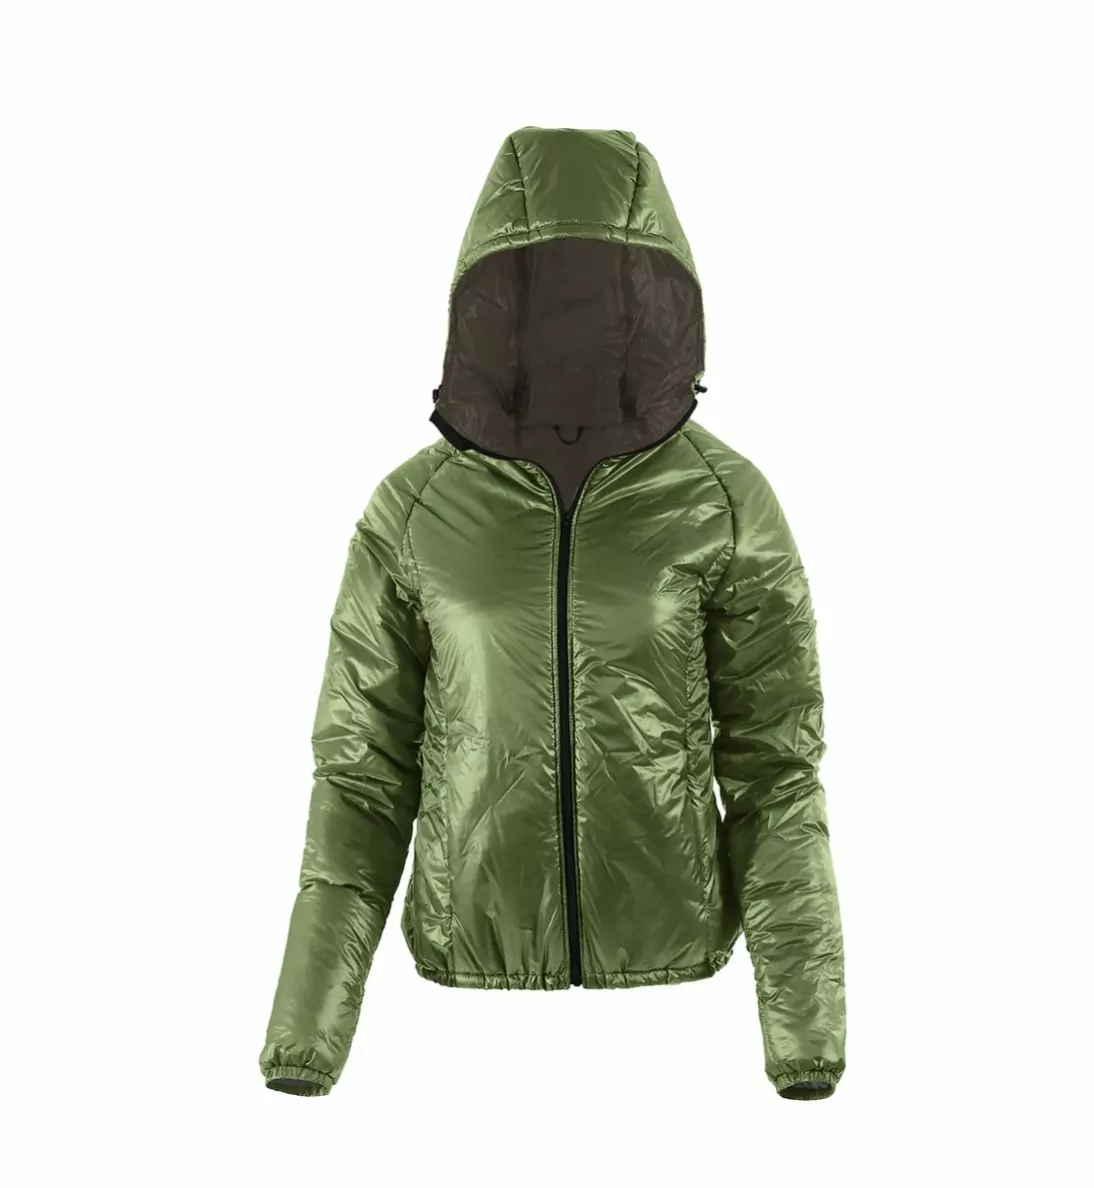 Trinity Cold Weather Performance Jacket